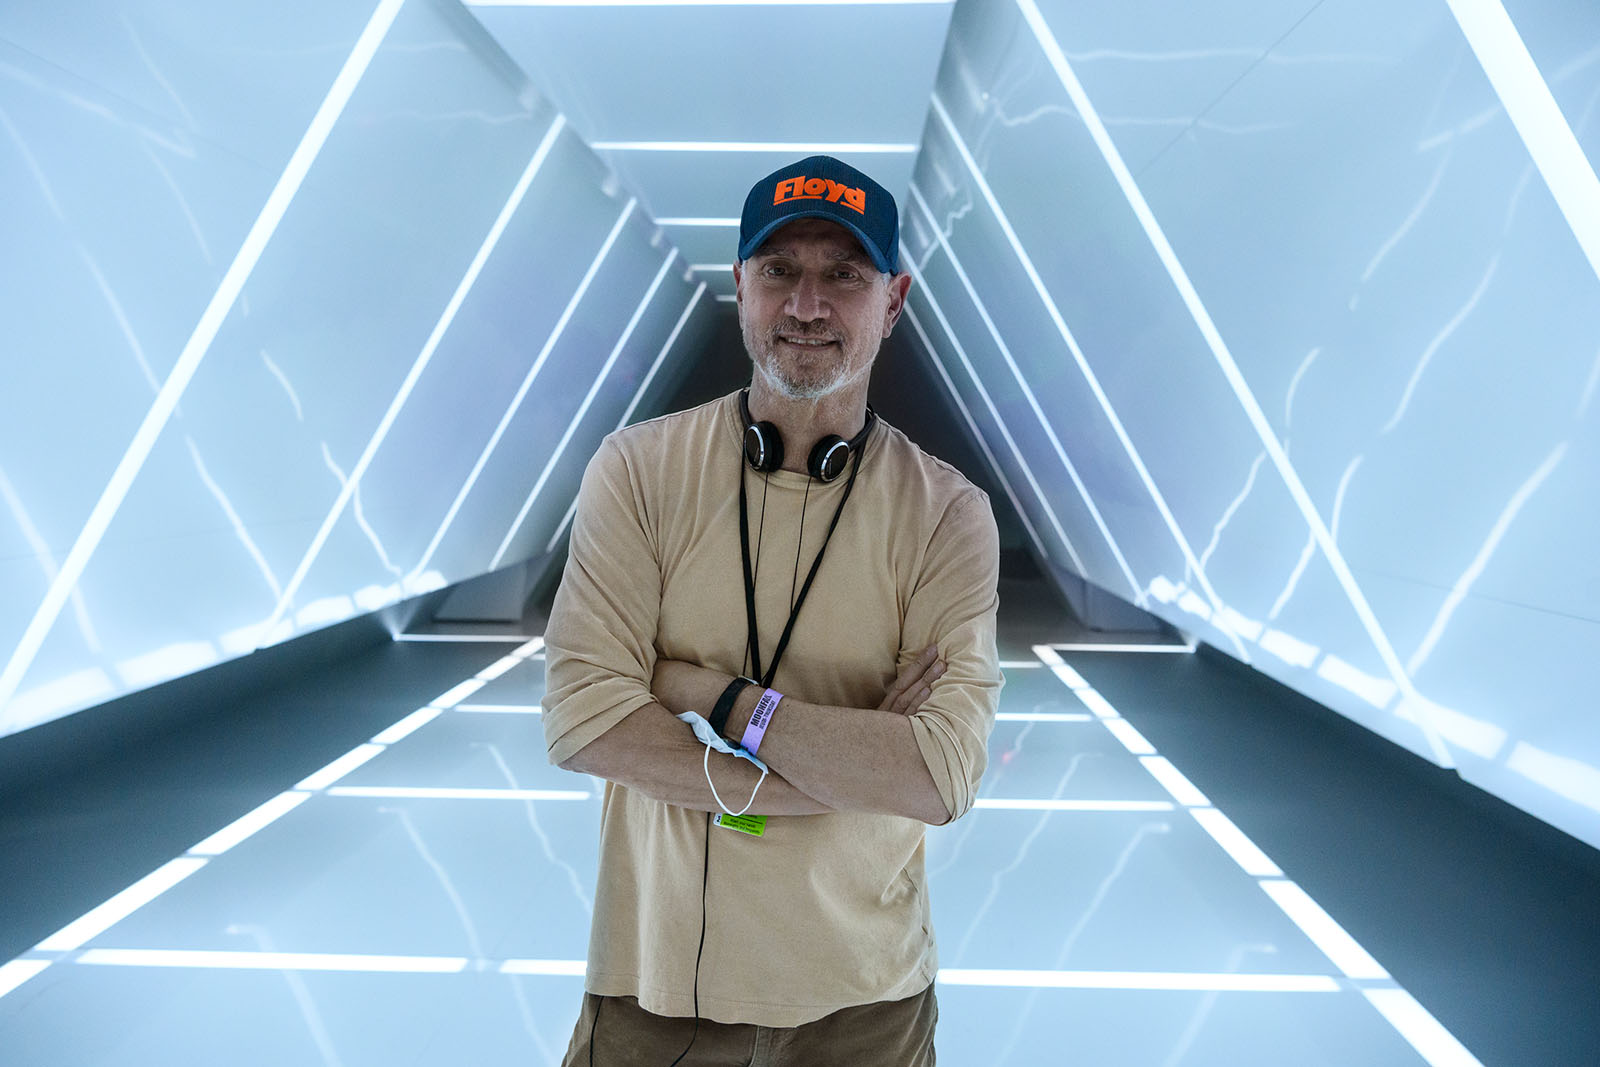 Writer, producer, and director Roland Emmerich on the set of Moonfall. Image © Lionsgate Movies